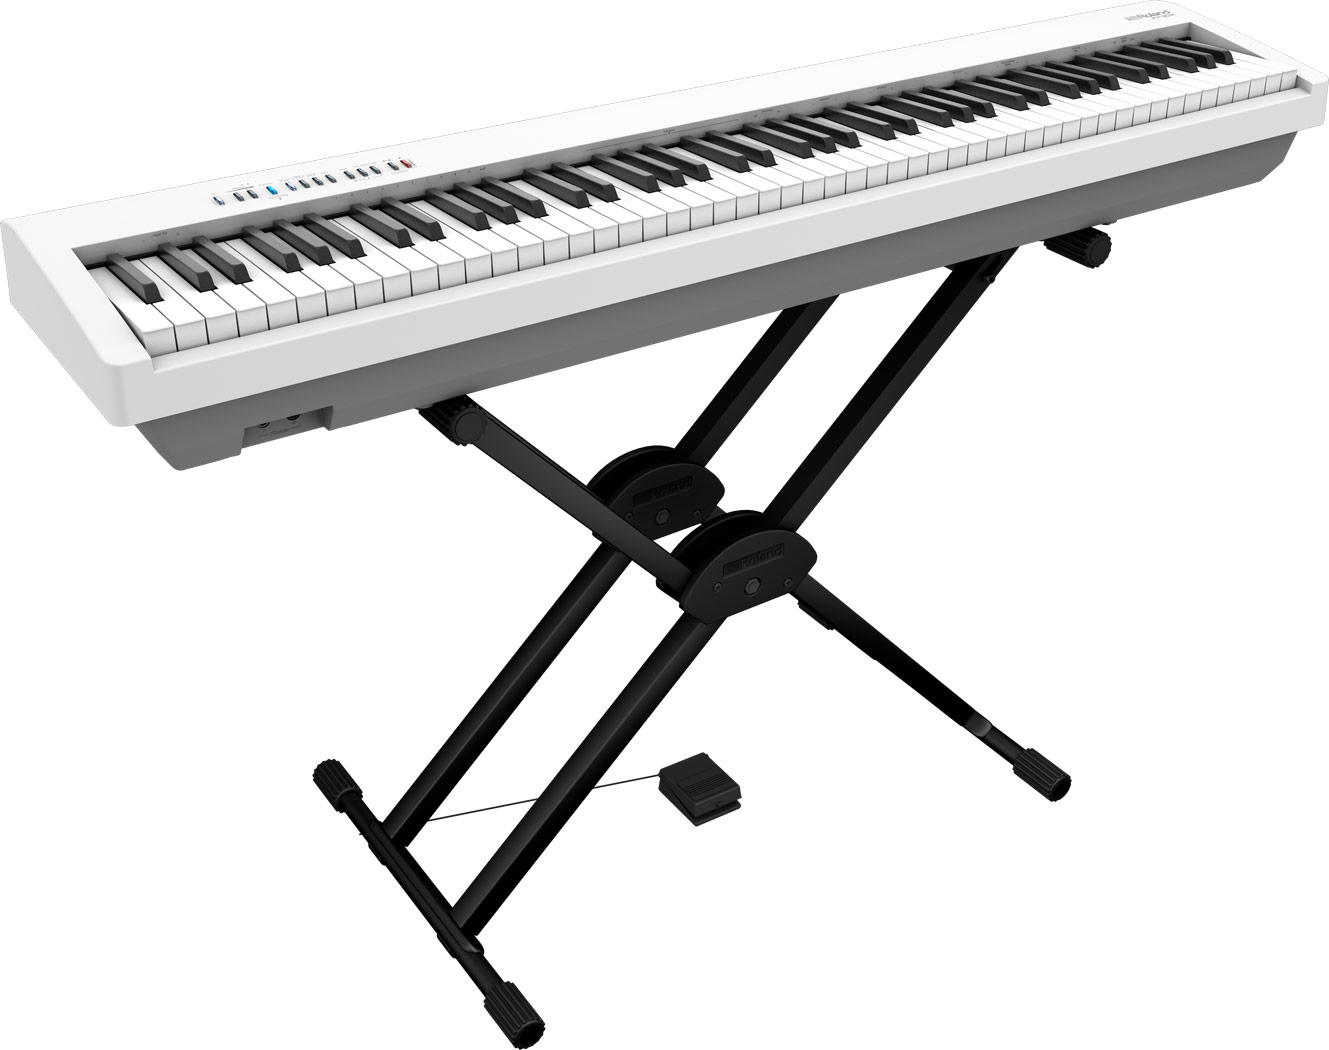 Roland FP30X Black Digital Piano Value Package